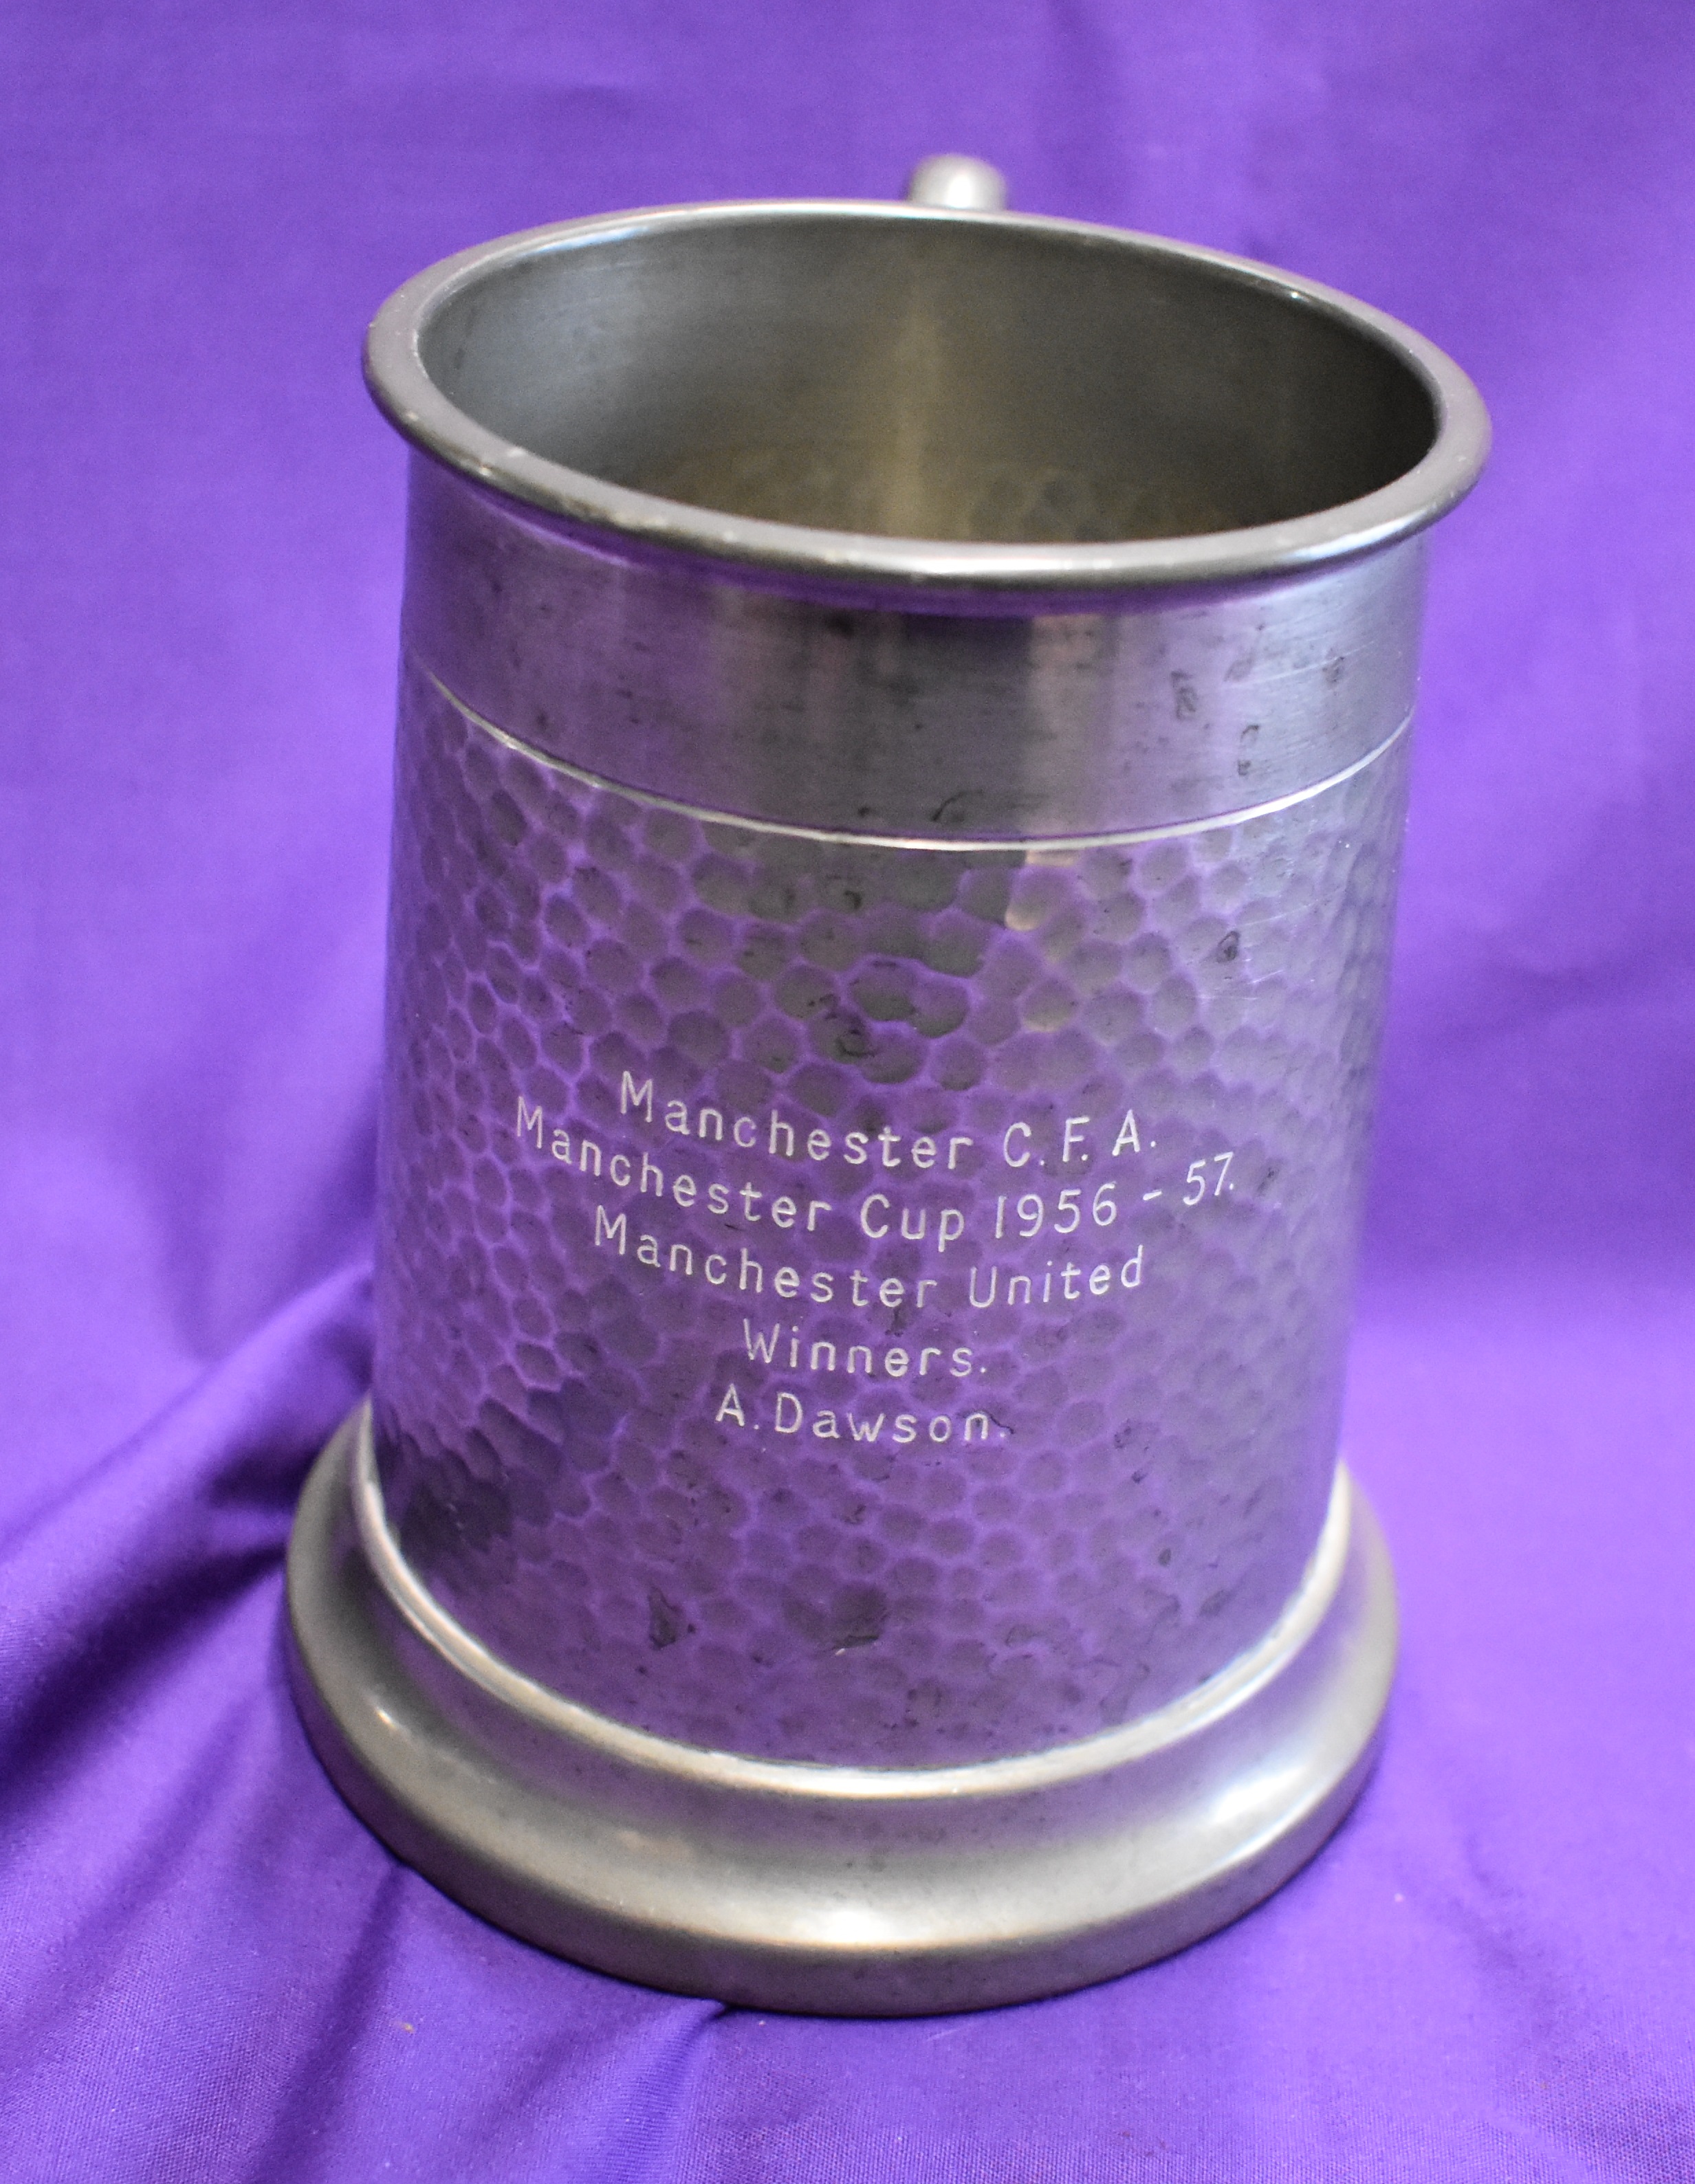 An engraved Central League Winners pewter mug presented to Alex Dawson of Manchester United from the